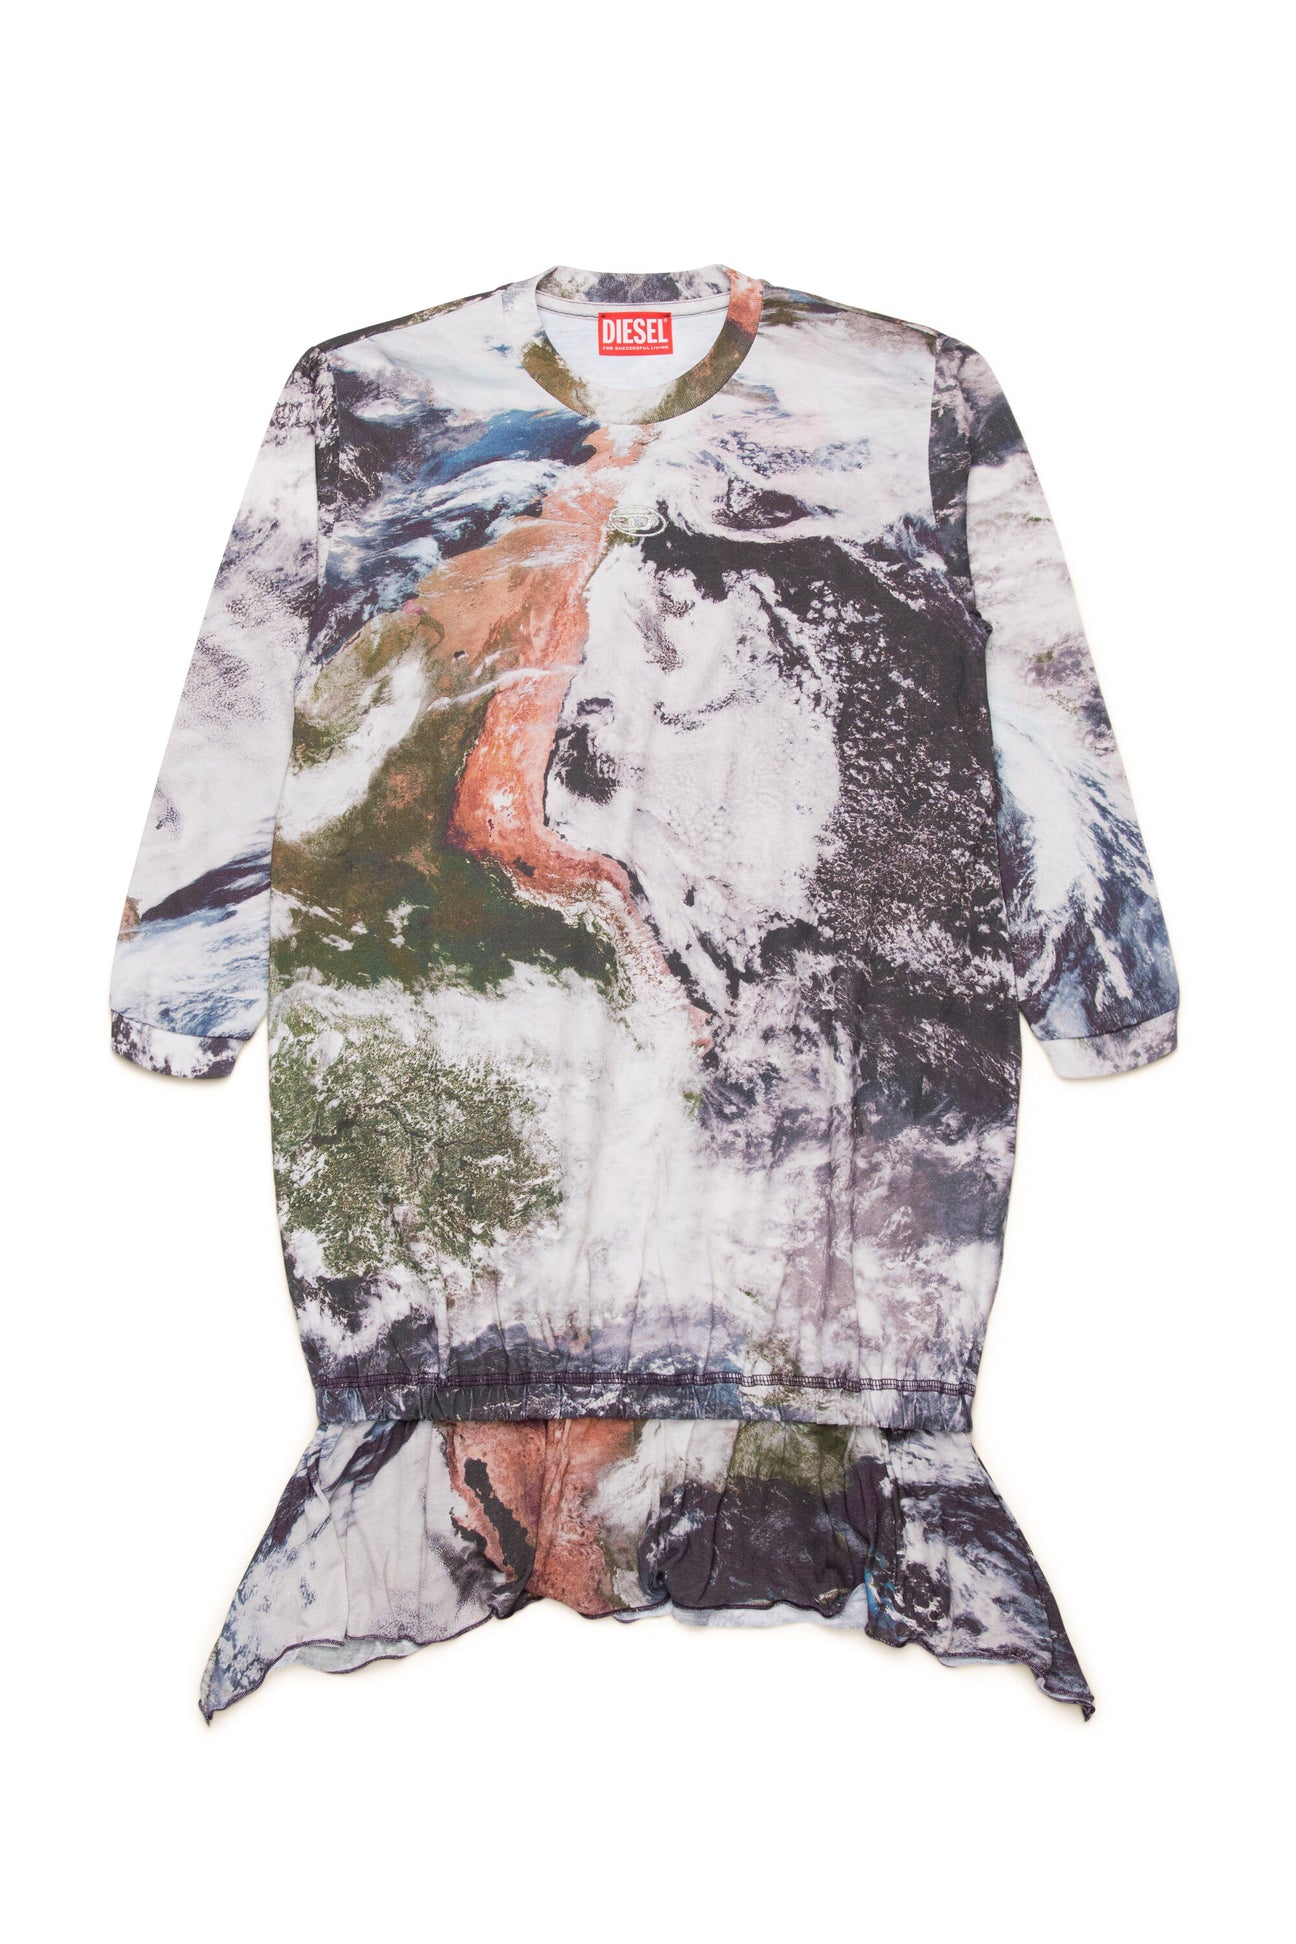 All-over Planet Camou dress All-over Planet Camou dress